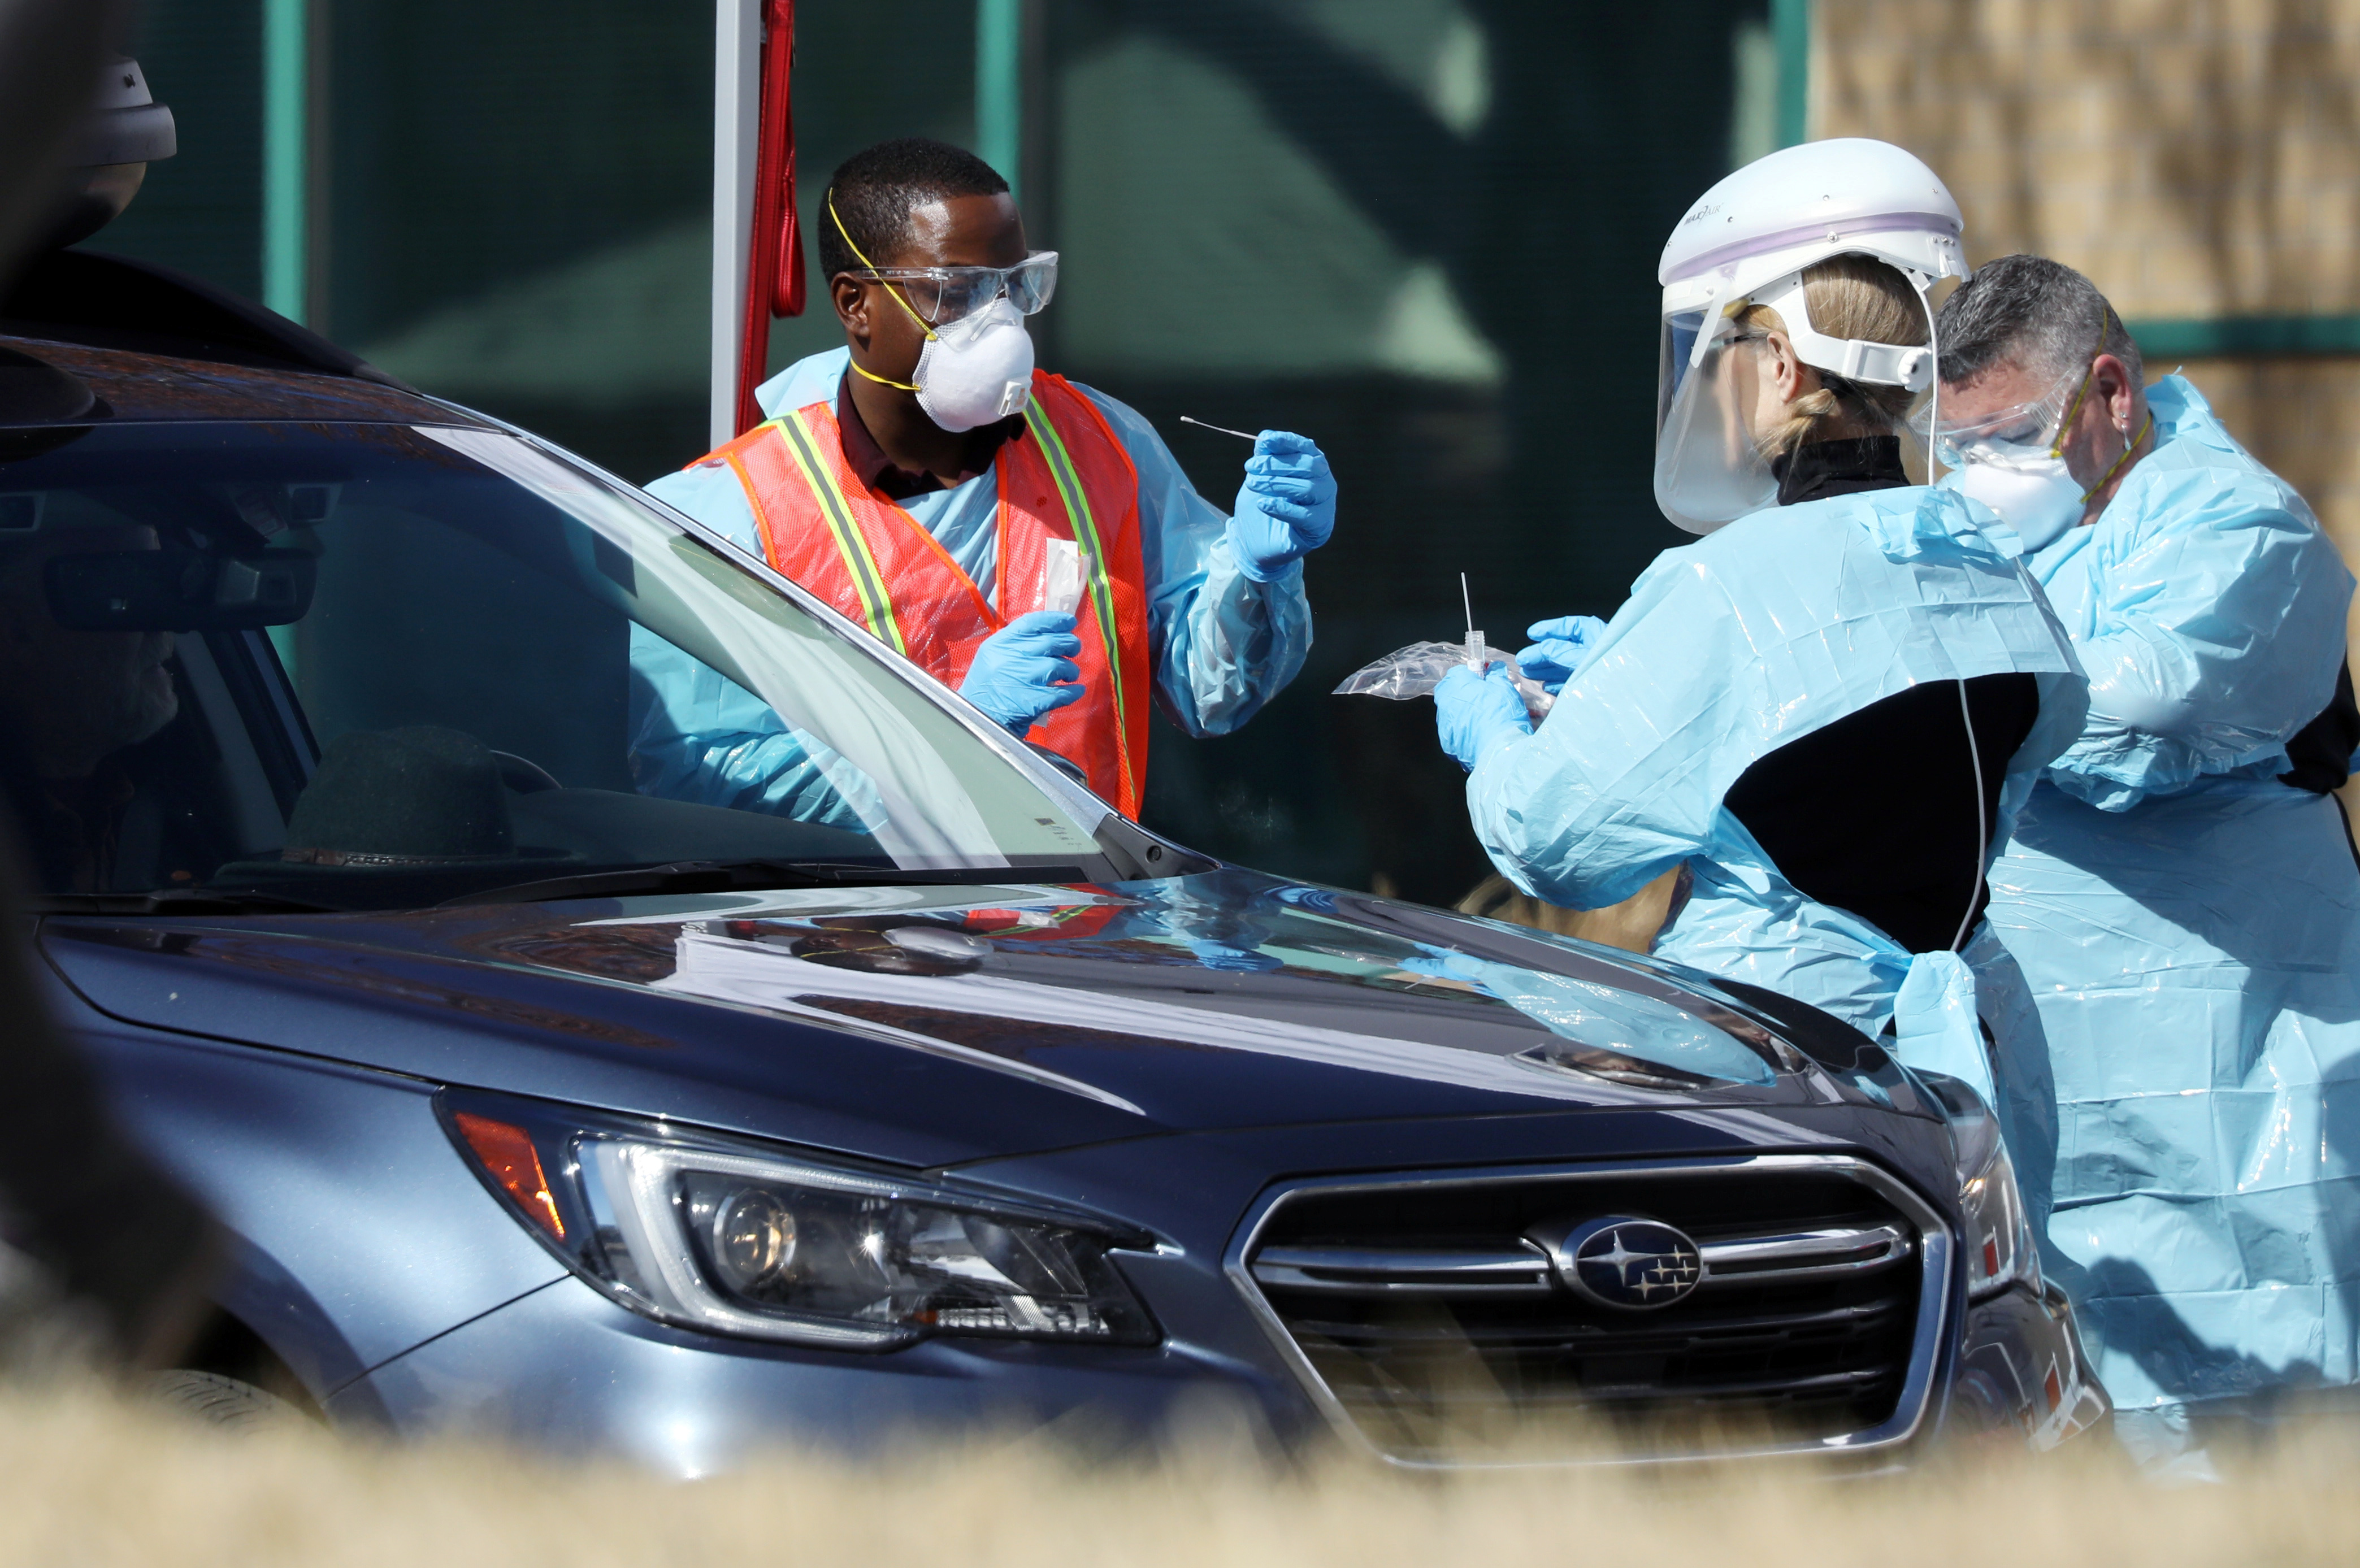 Health care workers test people at a drive-thru testing station run by the state health department, for people who suspect they have novel coronavirus, in Denver, Colorado, U.S. March 11, 2020. REUTERS/Jim Urquhart